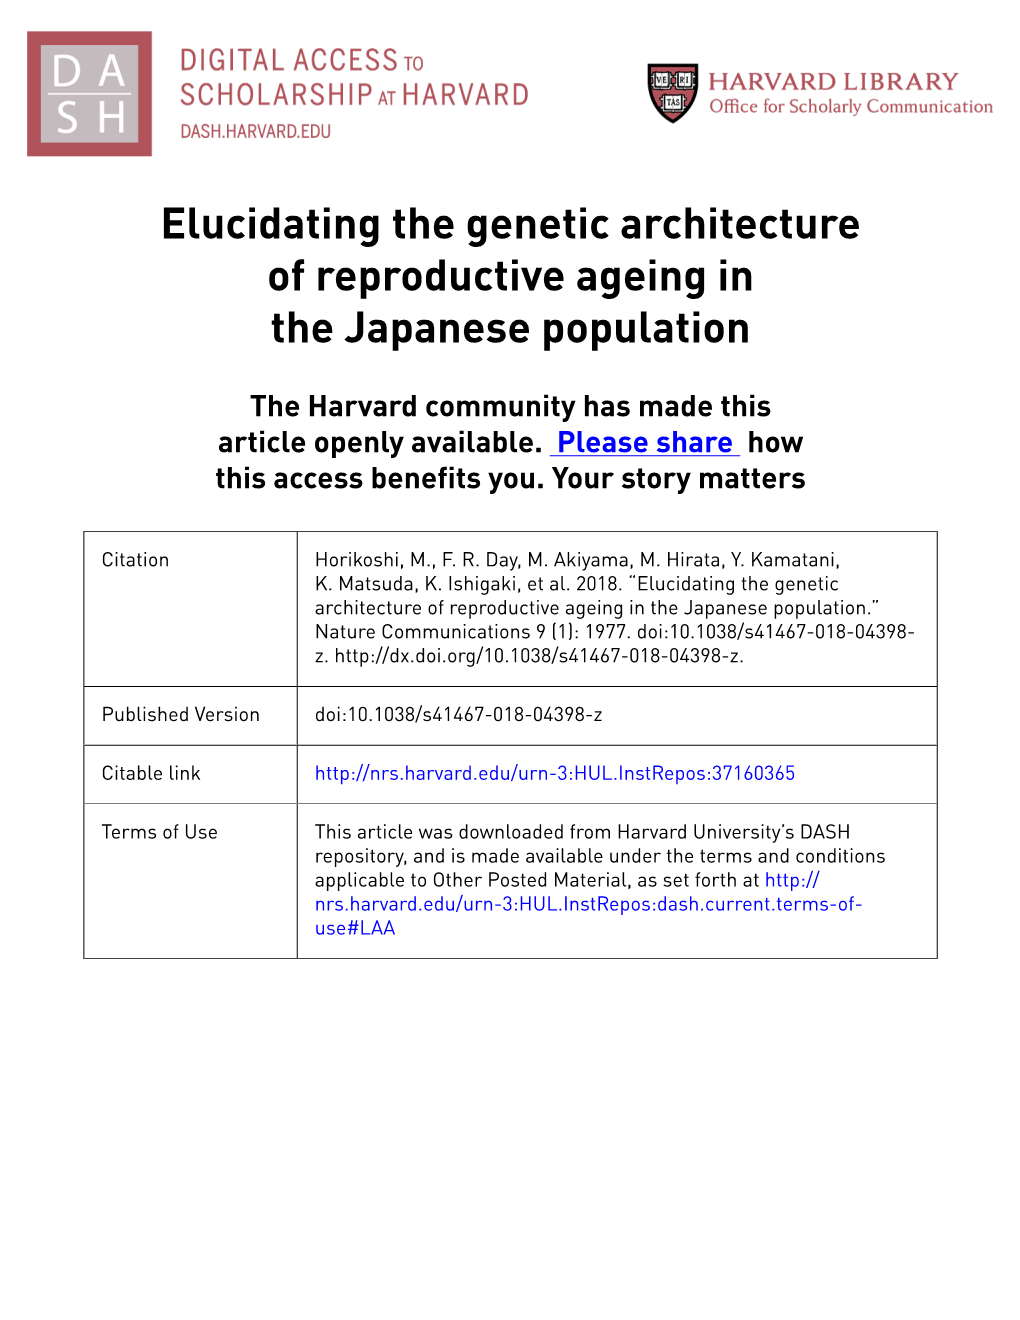 Elucidating the Genetic Architecture of Reproductive Ageing in the Japanese Population